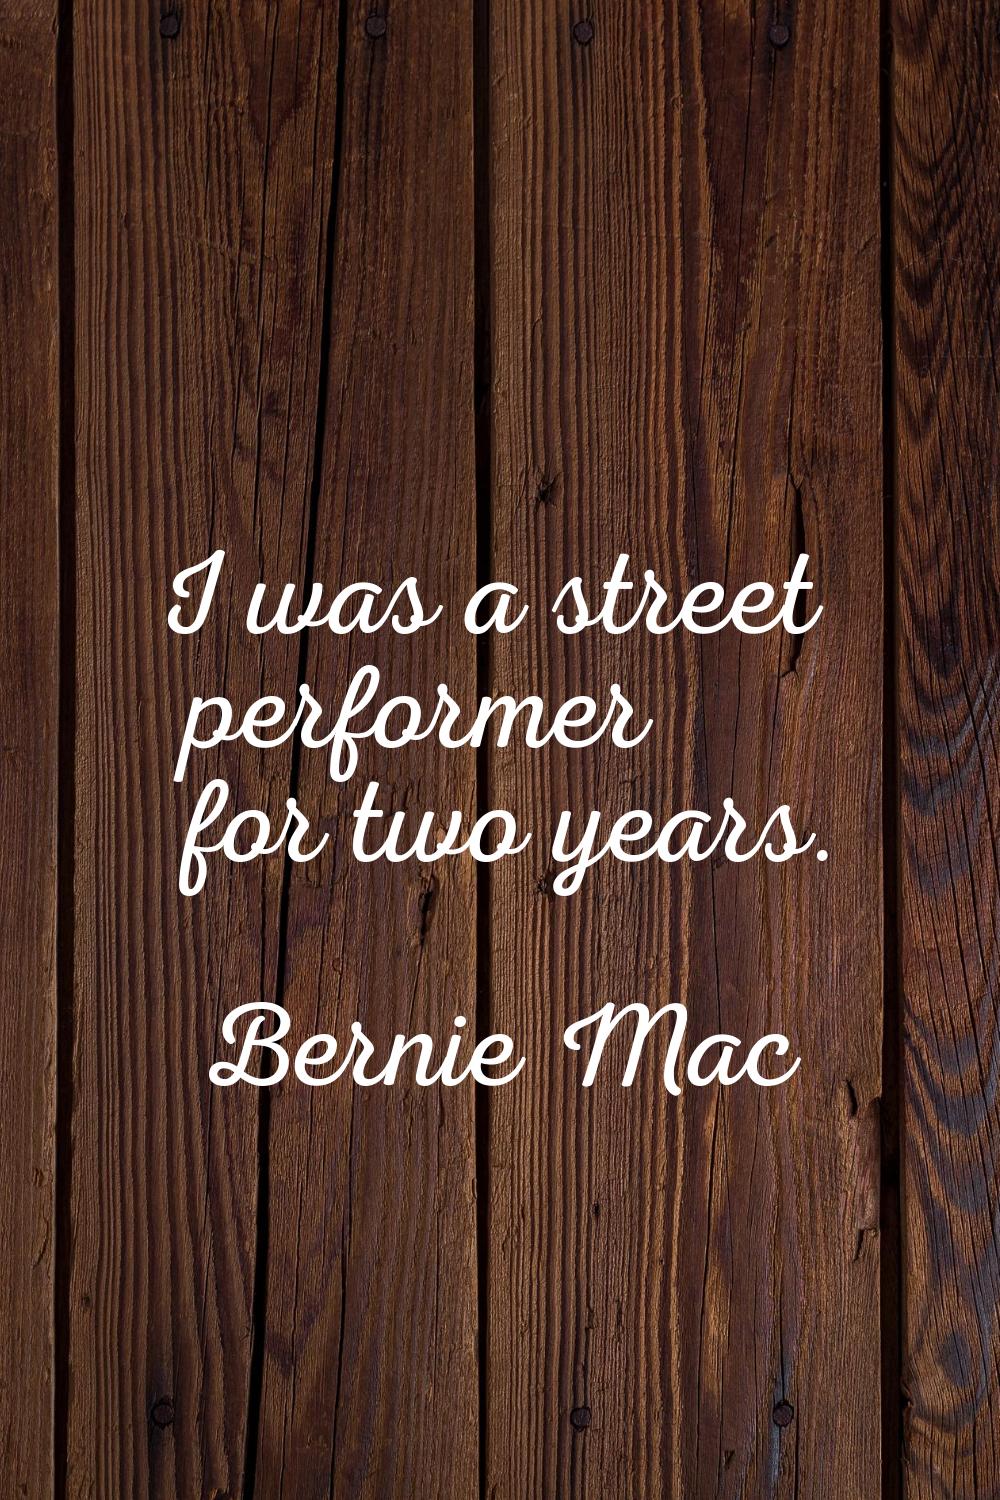 I was a street performer for two years.